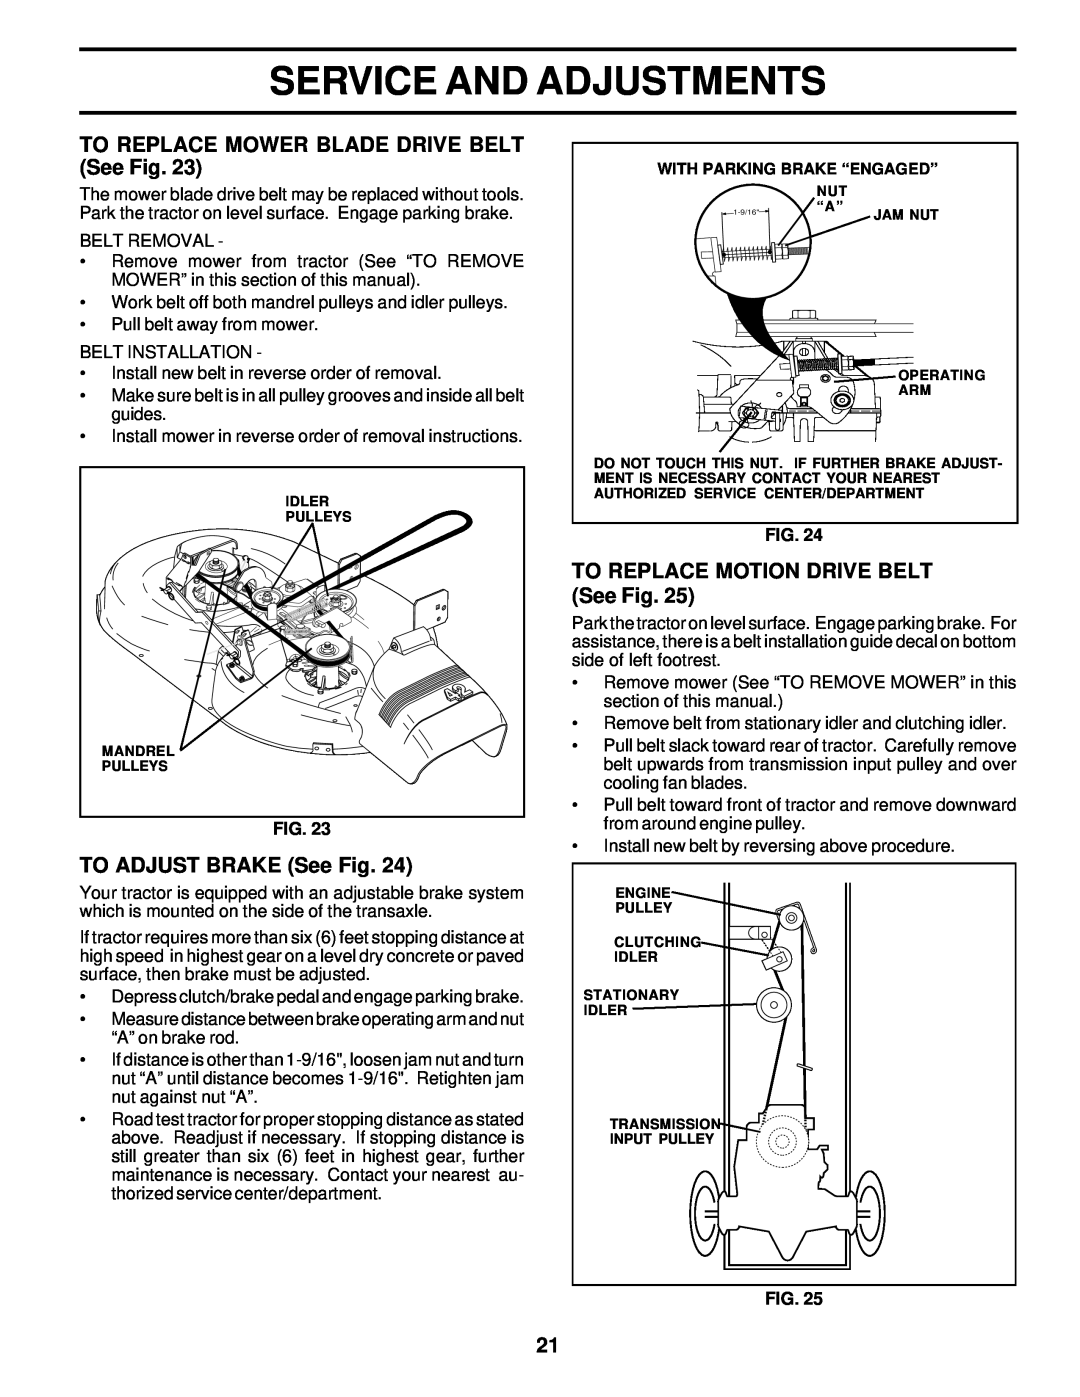 Poulan 177552 TO REPLACE MOWER BLADE DRIVE BELT See Fig, TO ADJUST BRAKE See Fig, TO REPLACE MOTION DRIVE BELT See Fig 